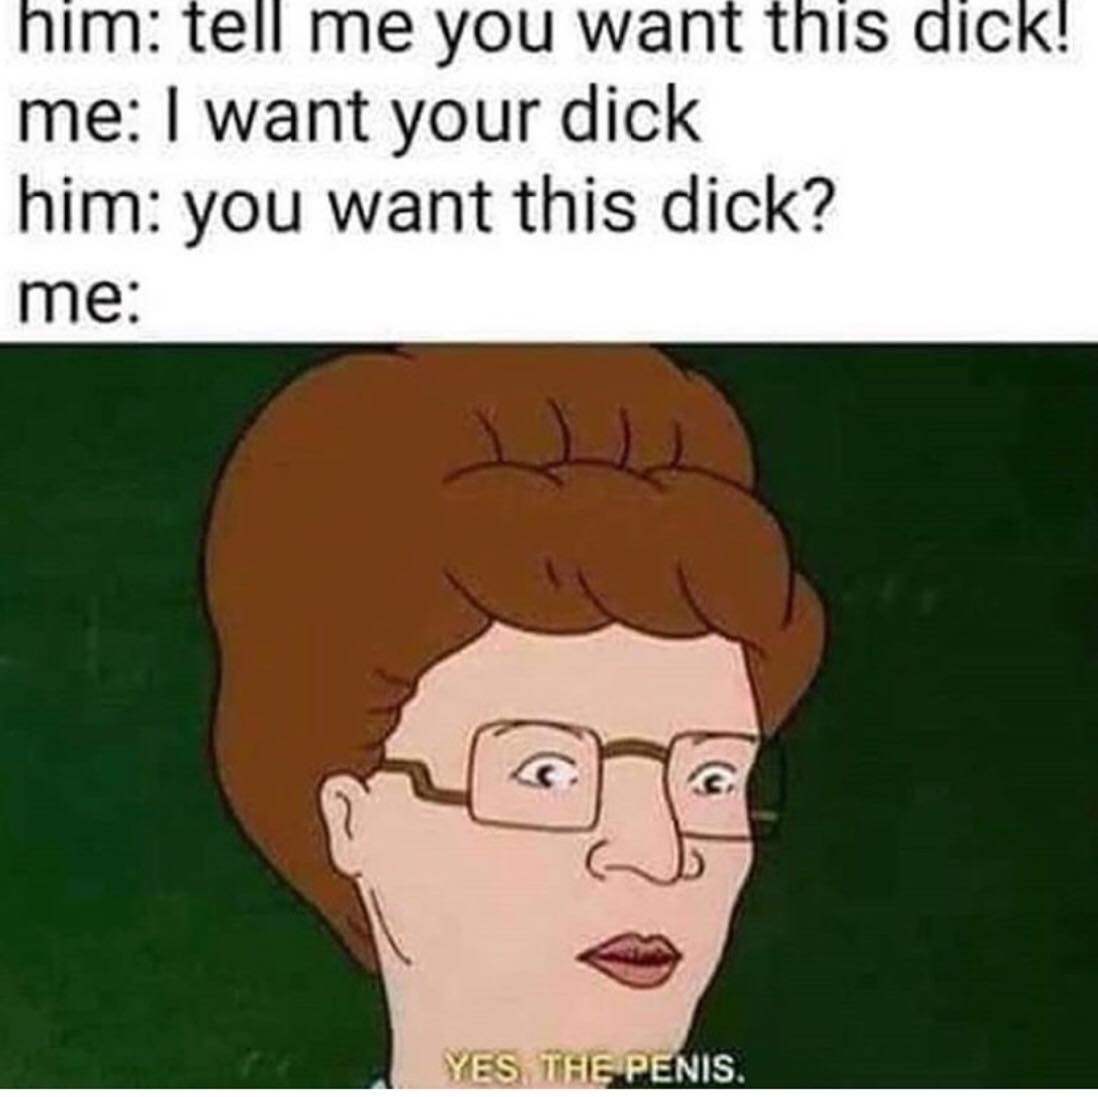 Do you want my dick